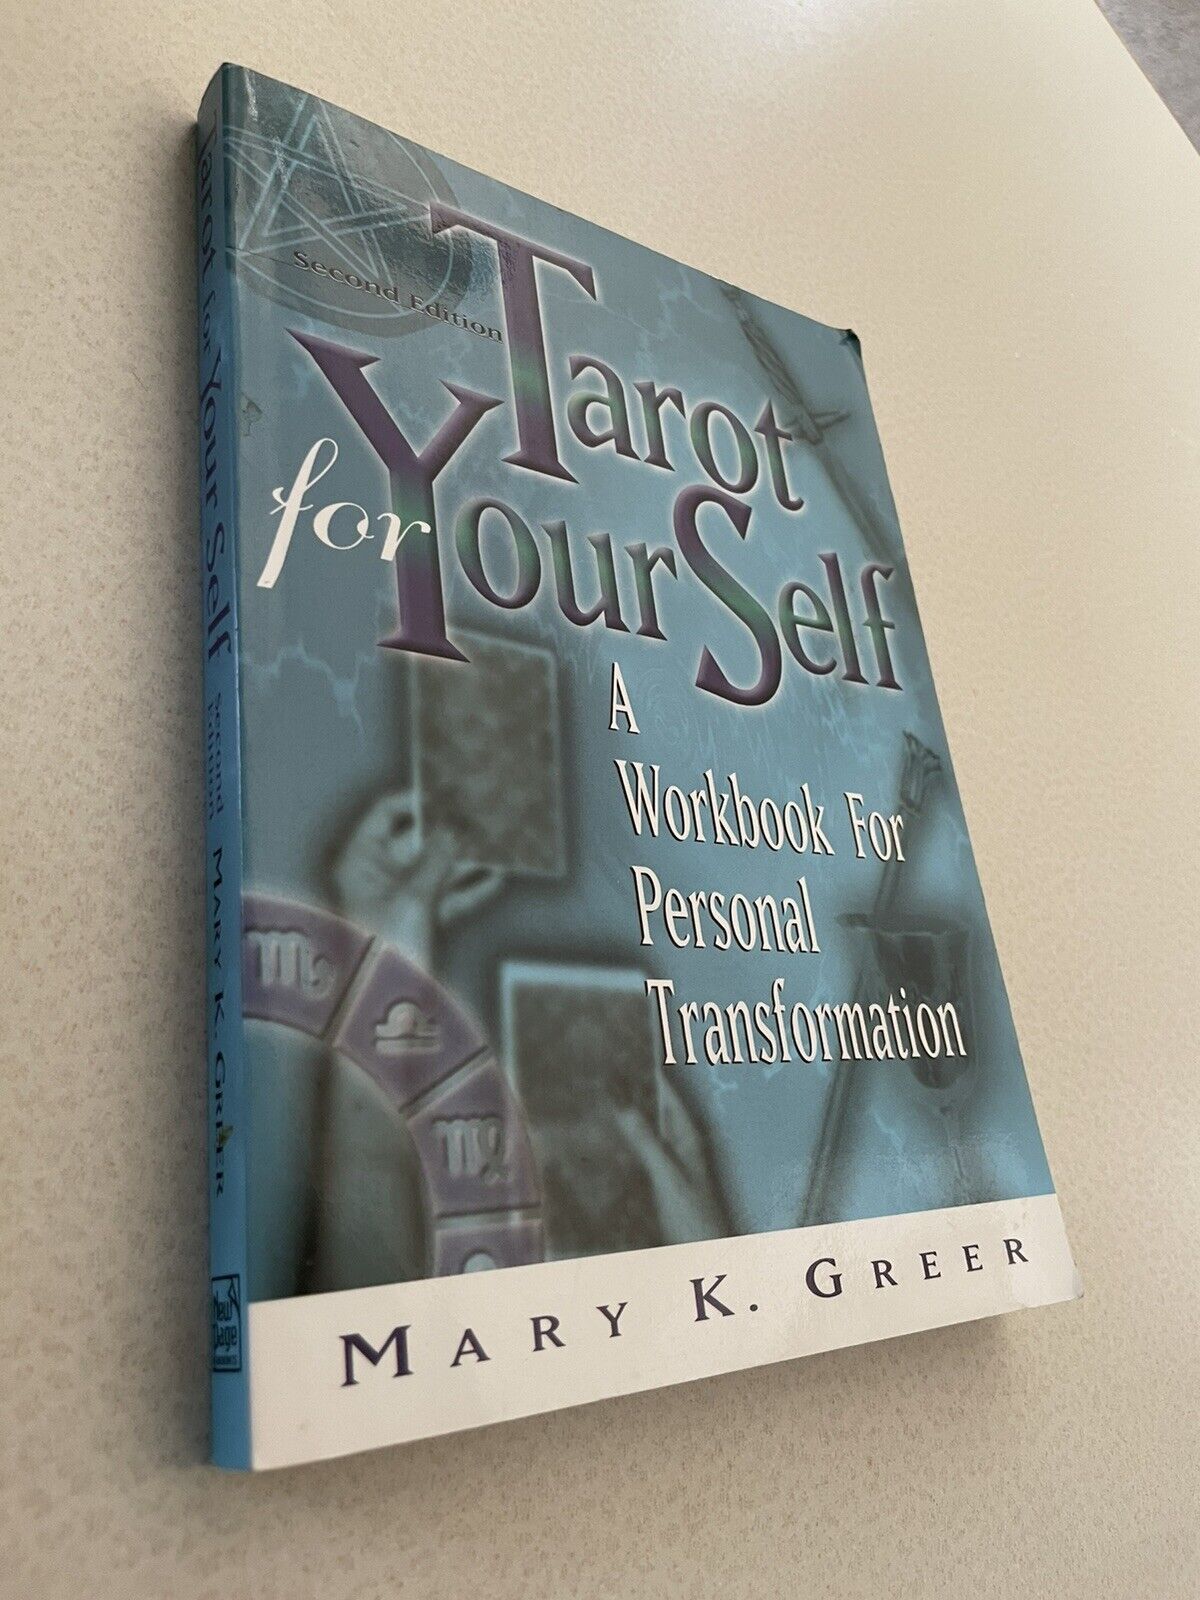 Tarot For Your Self A Workbook Greer, Mary K. Copyright @ 2002 VTG 2nd Ed.